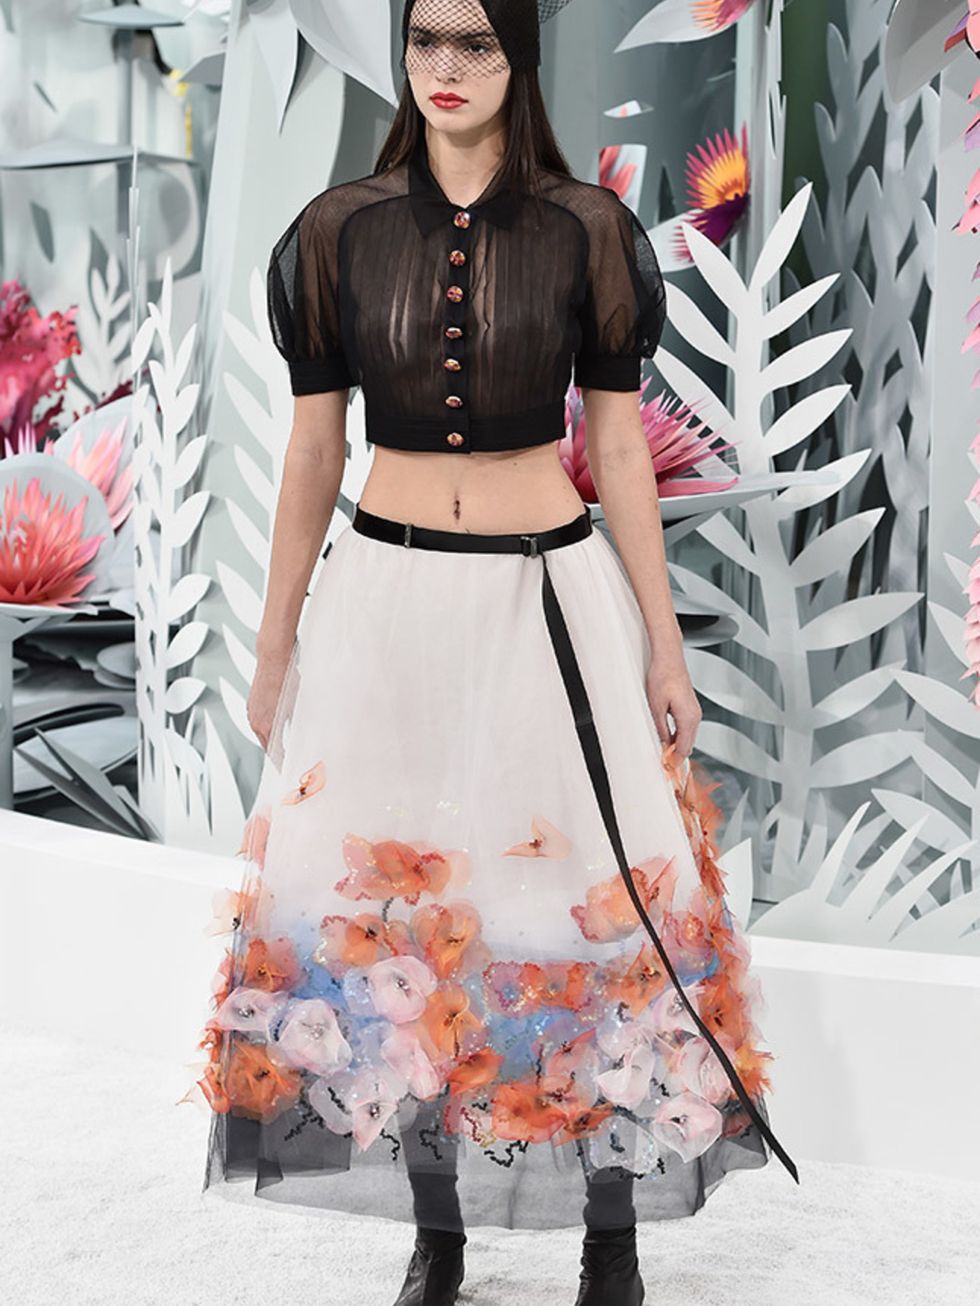 <p><a href="http://www.elleuk.com/tags/kendall-jenner">Kendall Jenner</a> at Chanel Couture s/s 2015.</p>